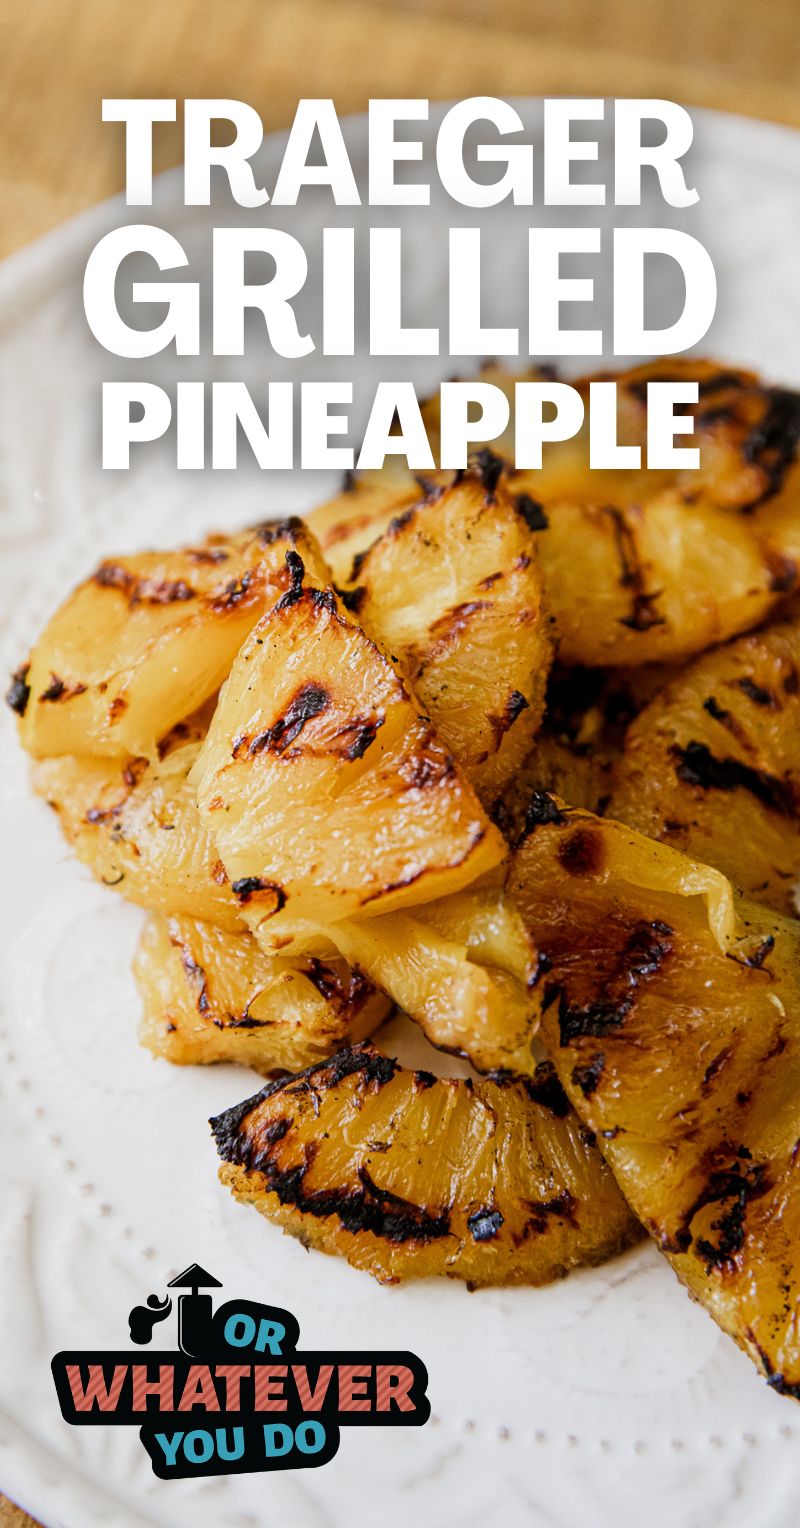 Traeger Grilled Pineapple